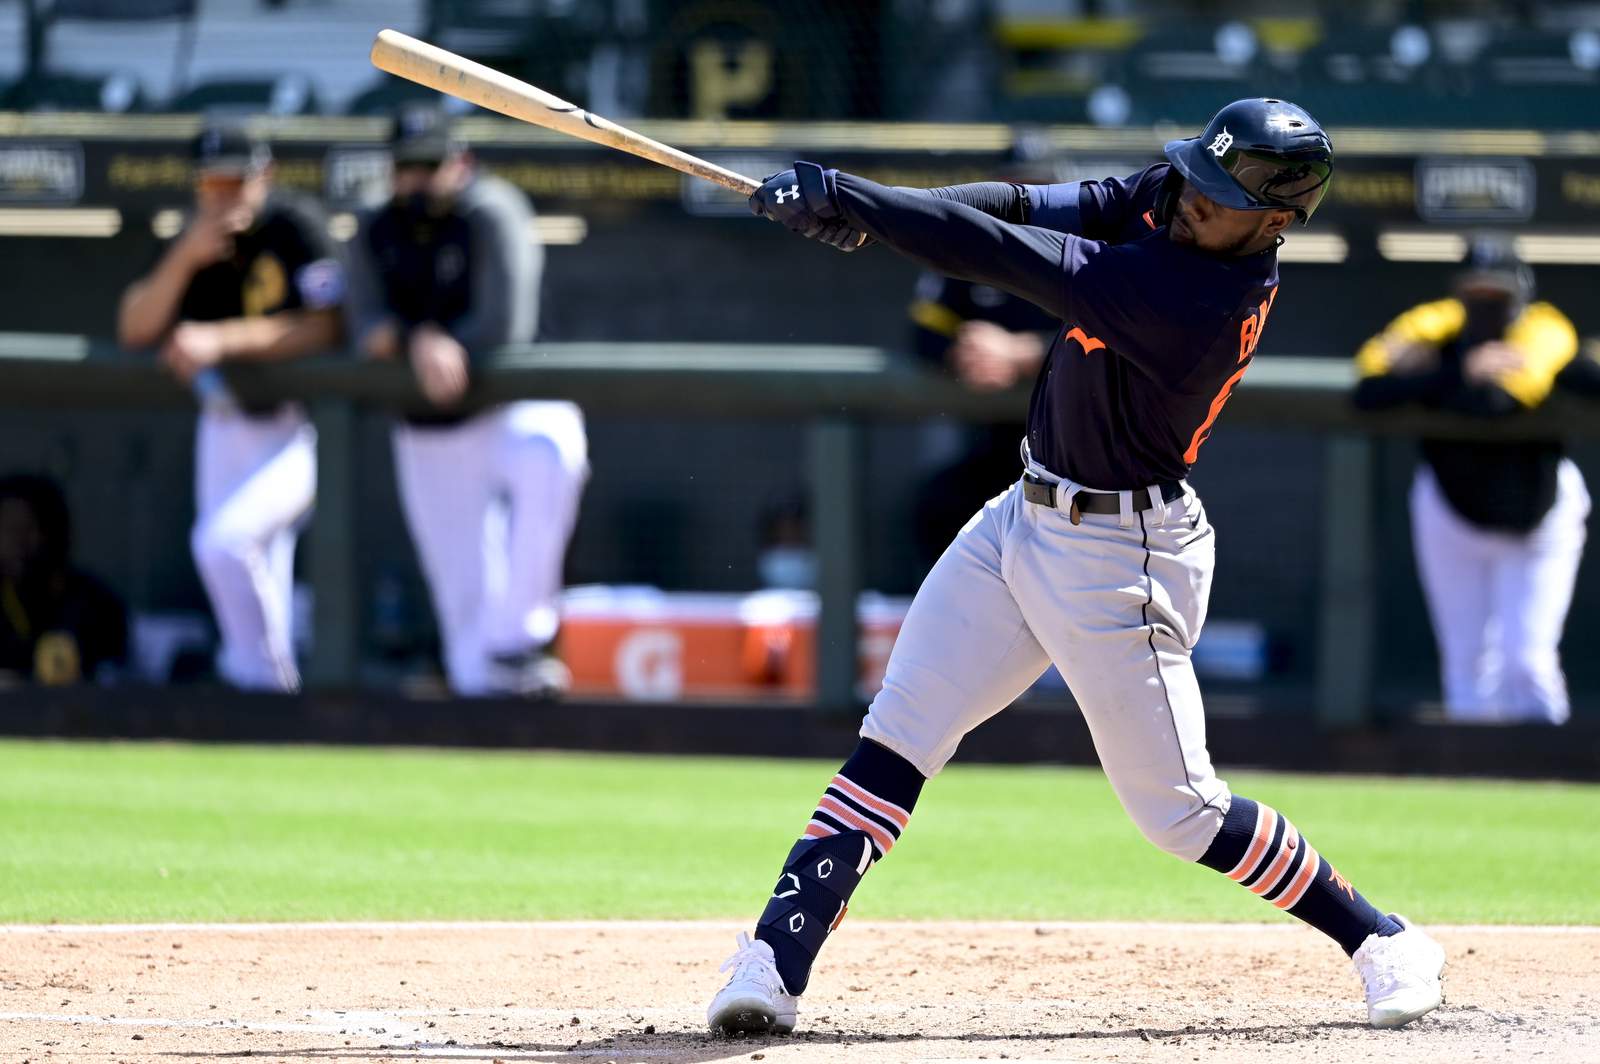 Detroit Tigers spring training phenom Akil Baddoo crushes homer on first career MLB pitch